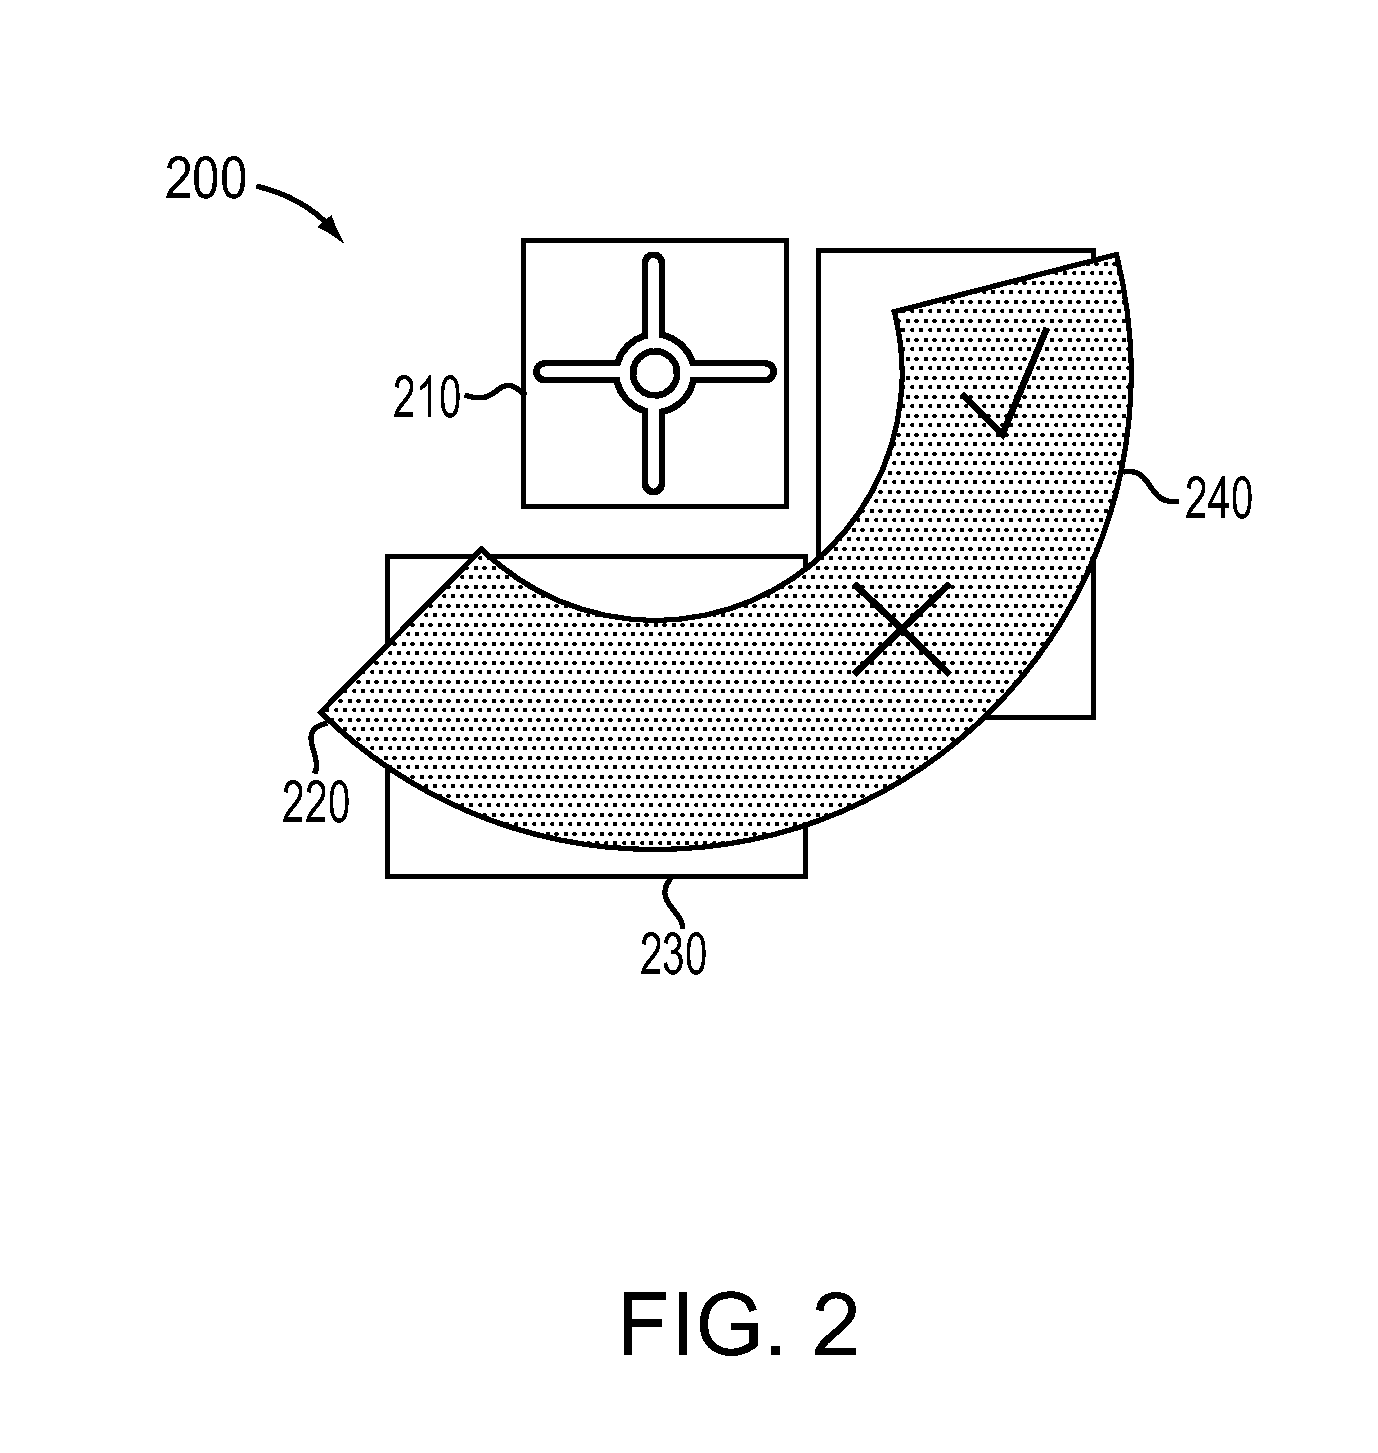 Virtual mouse for a touch screen device